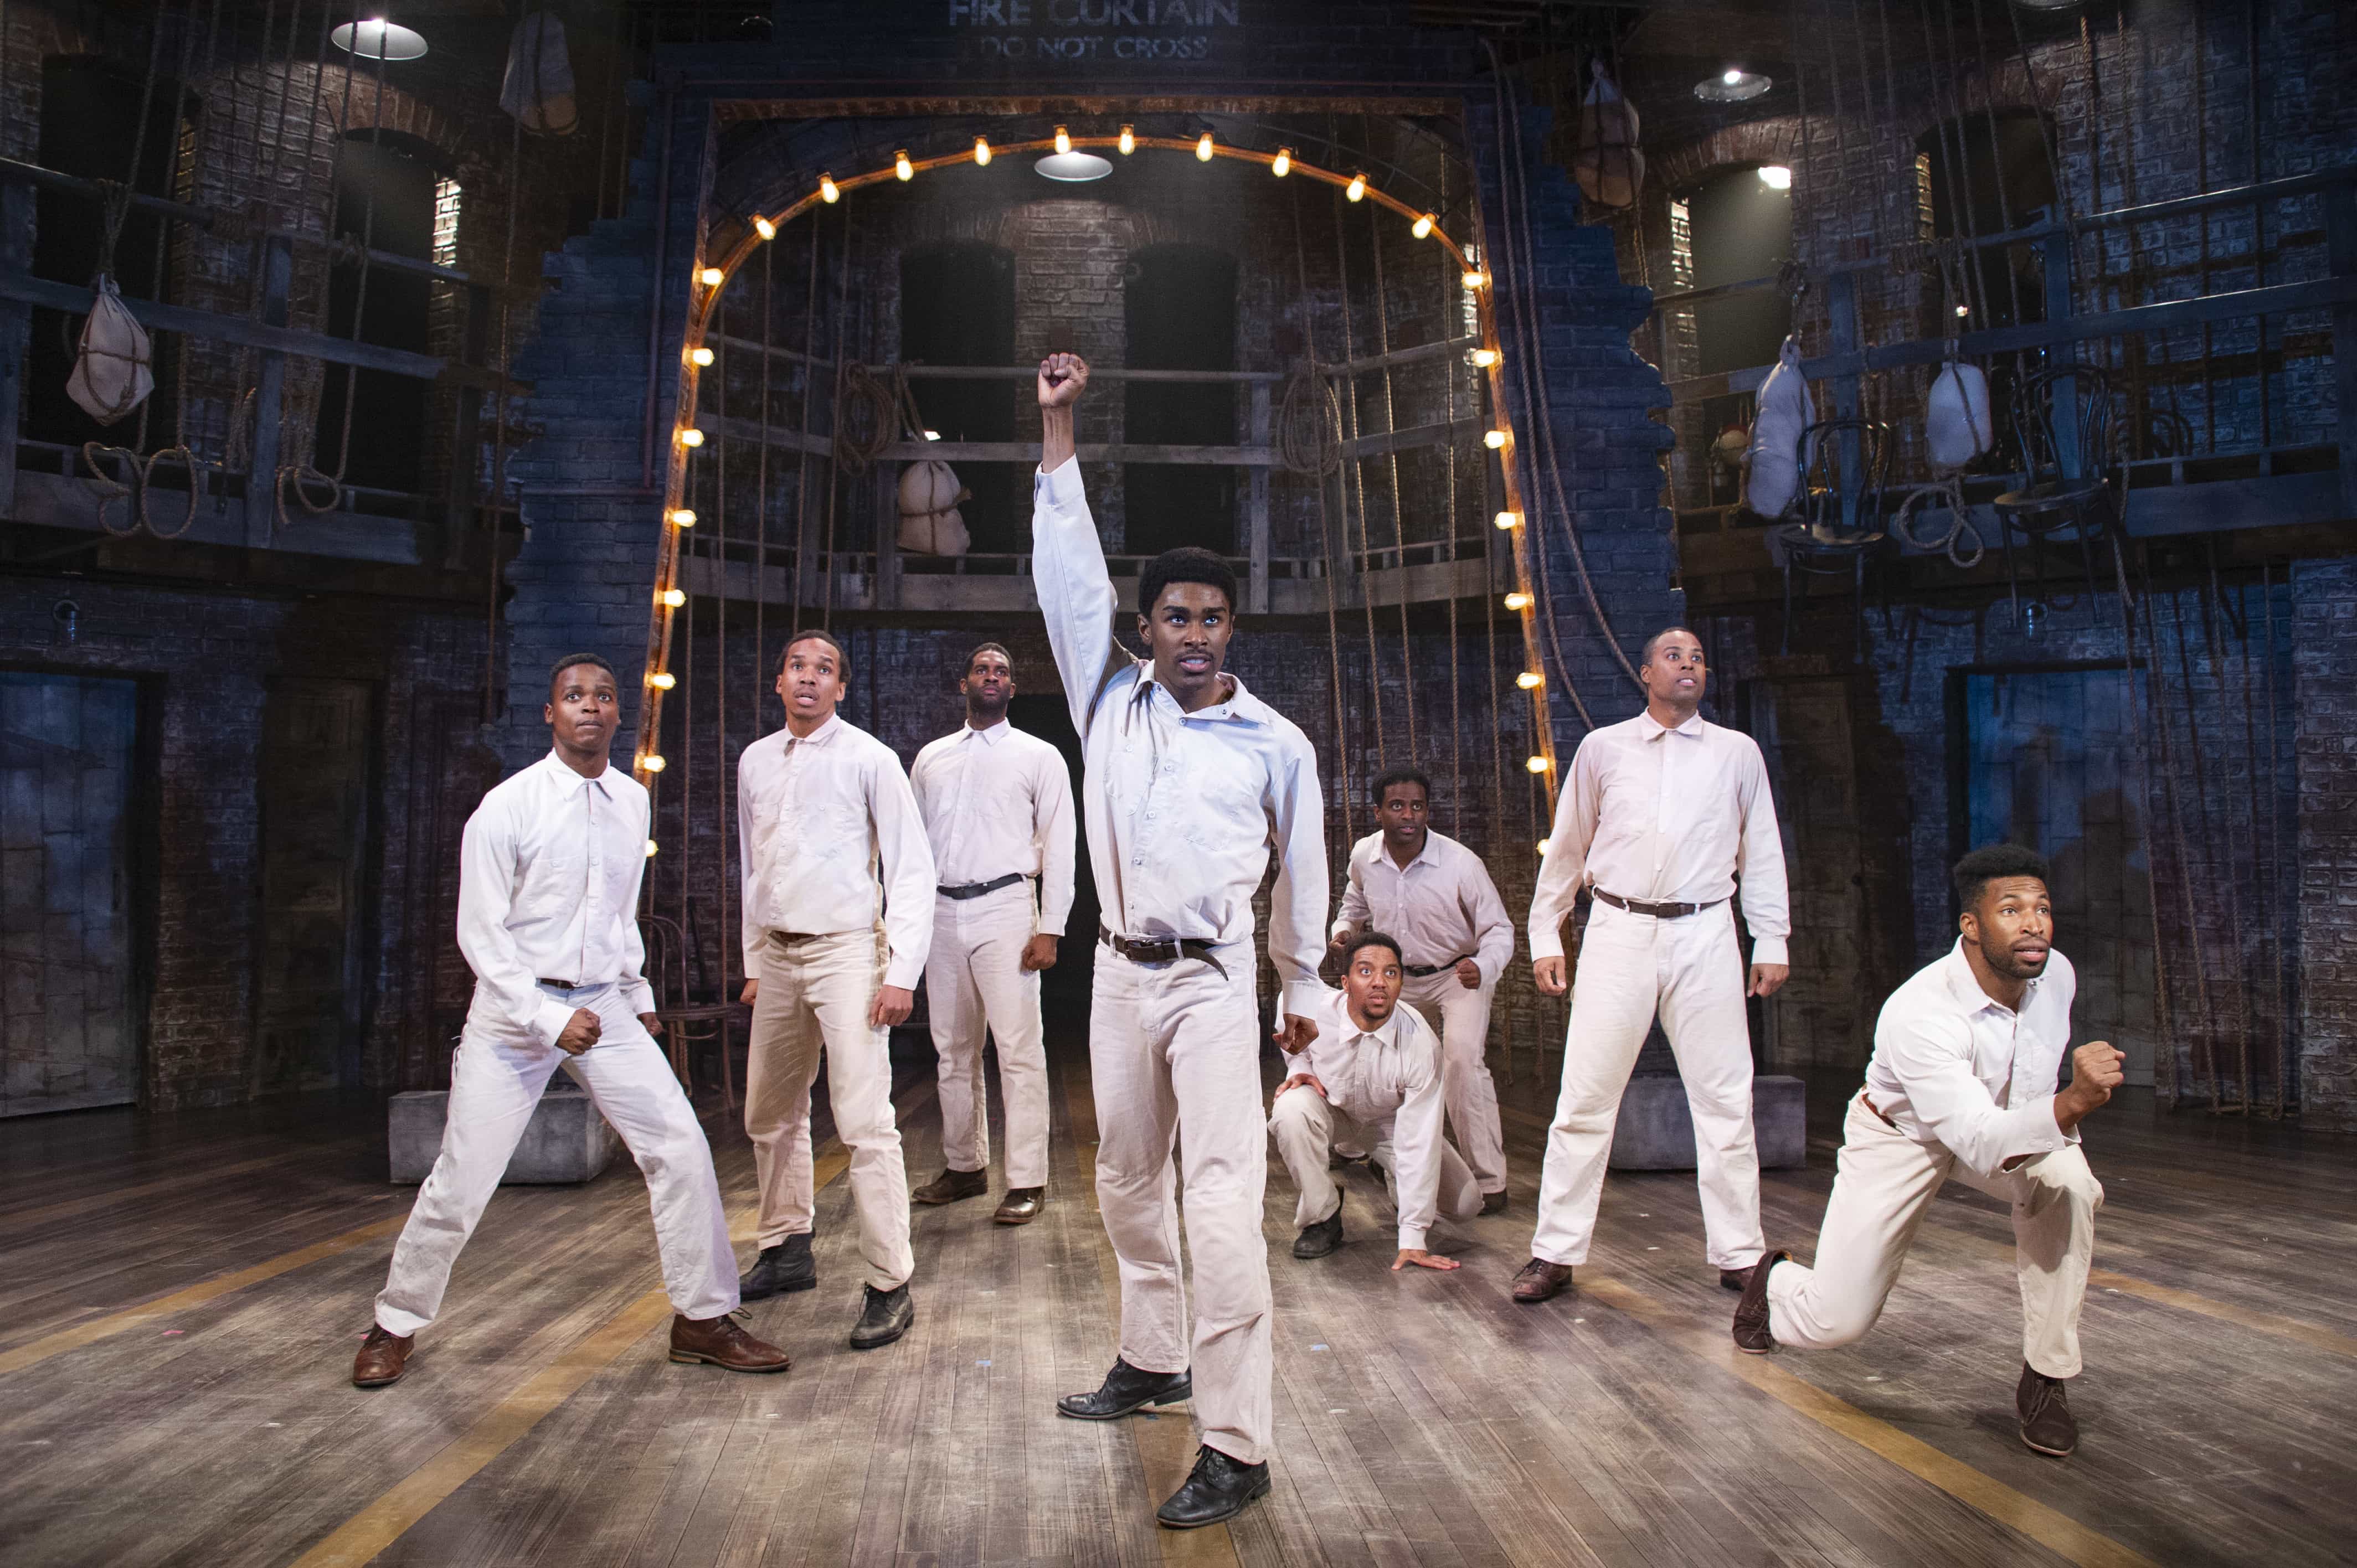 Aramie Payton (Eugene Williams), Joseph Monroe Webb (Olen Montgomery), Darrell Purcell Jr (Clarence Norris), Lamont Walker II (Haywood Patterson), Malik Akil (Charles Weems), C.K. Edwards (Roy Wright), DeWitt Fleming, Jr. (Ozie Powell), and Jonathan Adriel (Andy Wright) in The Scottsboro Boys at Signature Theatre. Photo by C Stanley Photography.